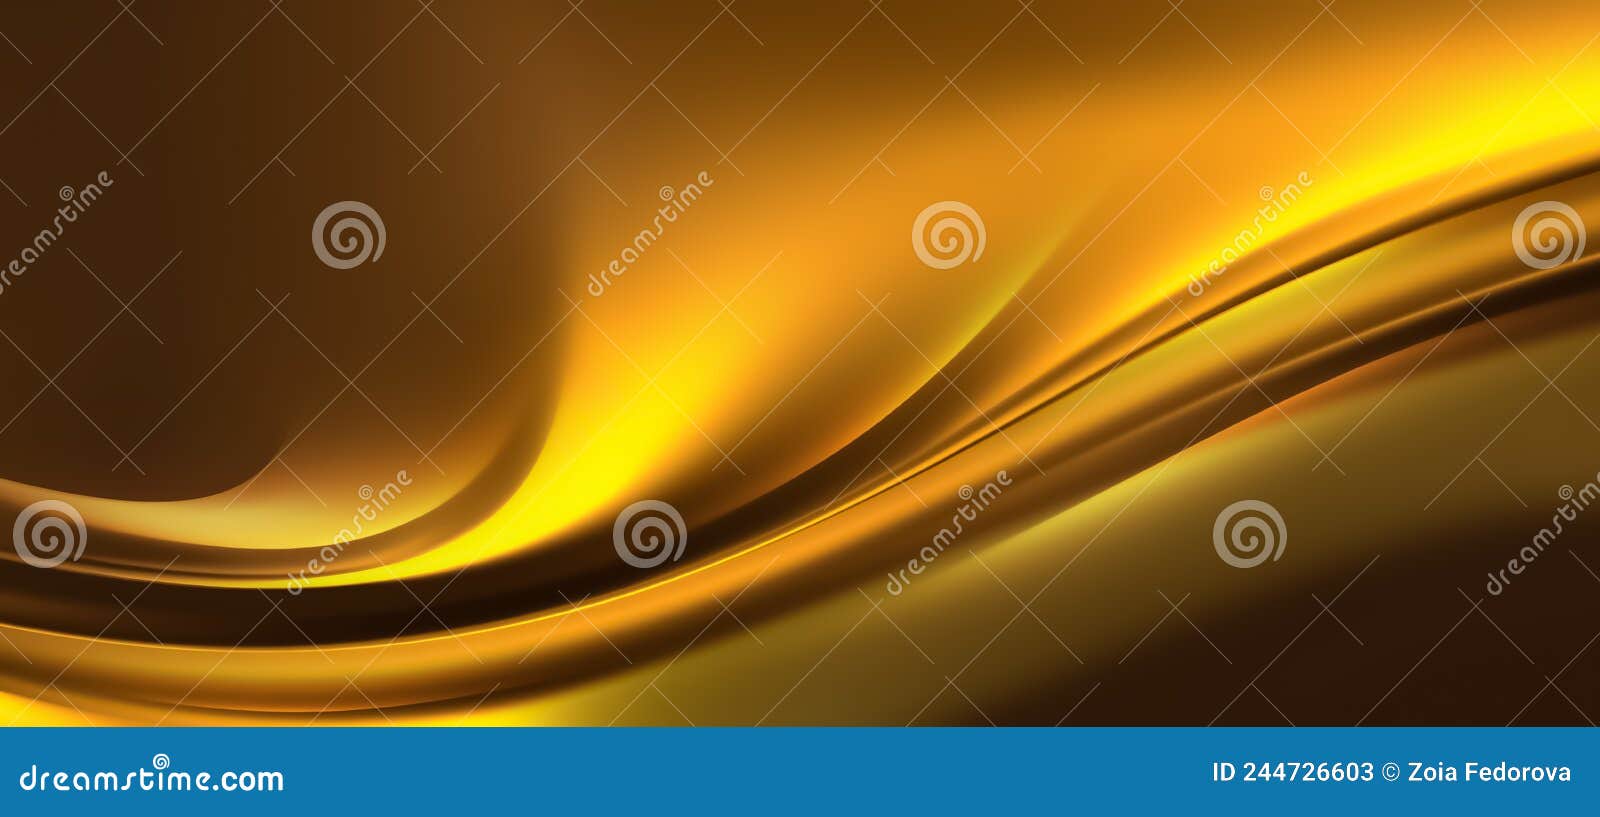 bright saturated gold background